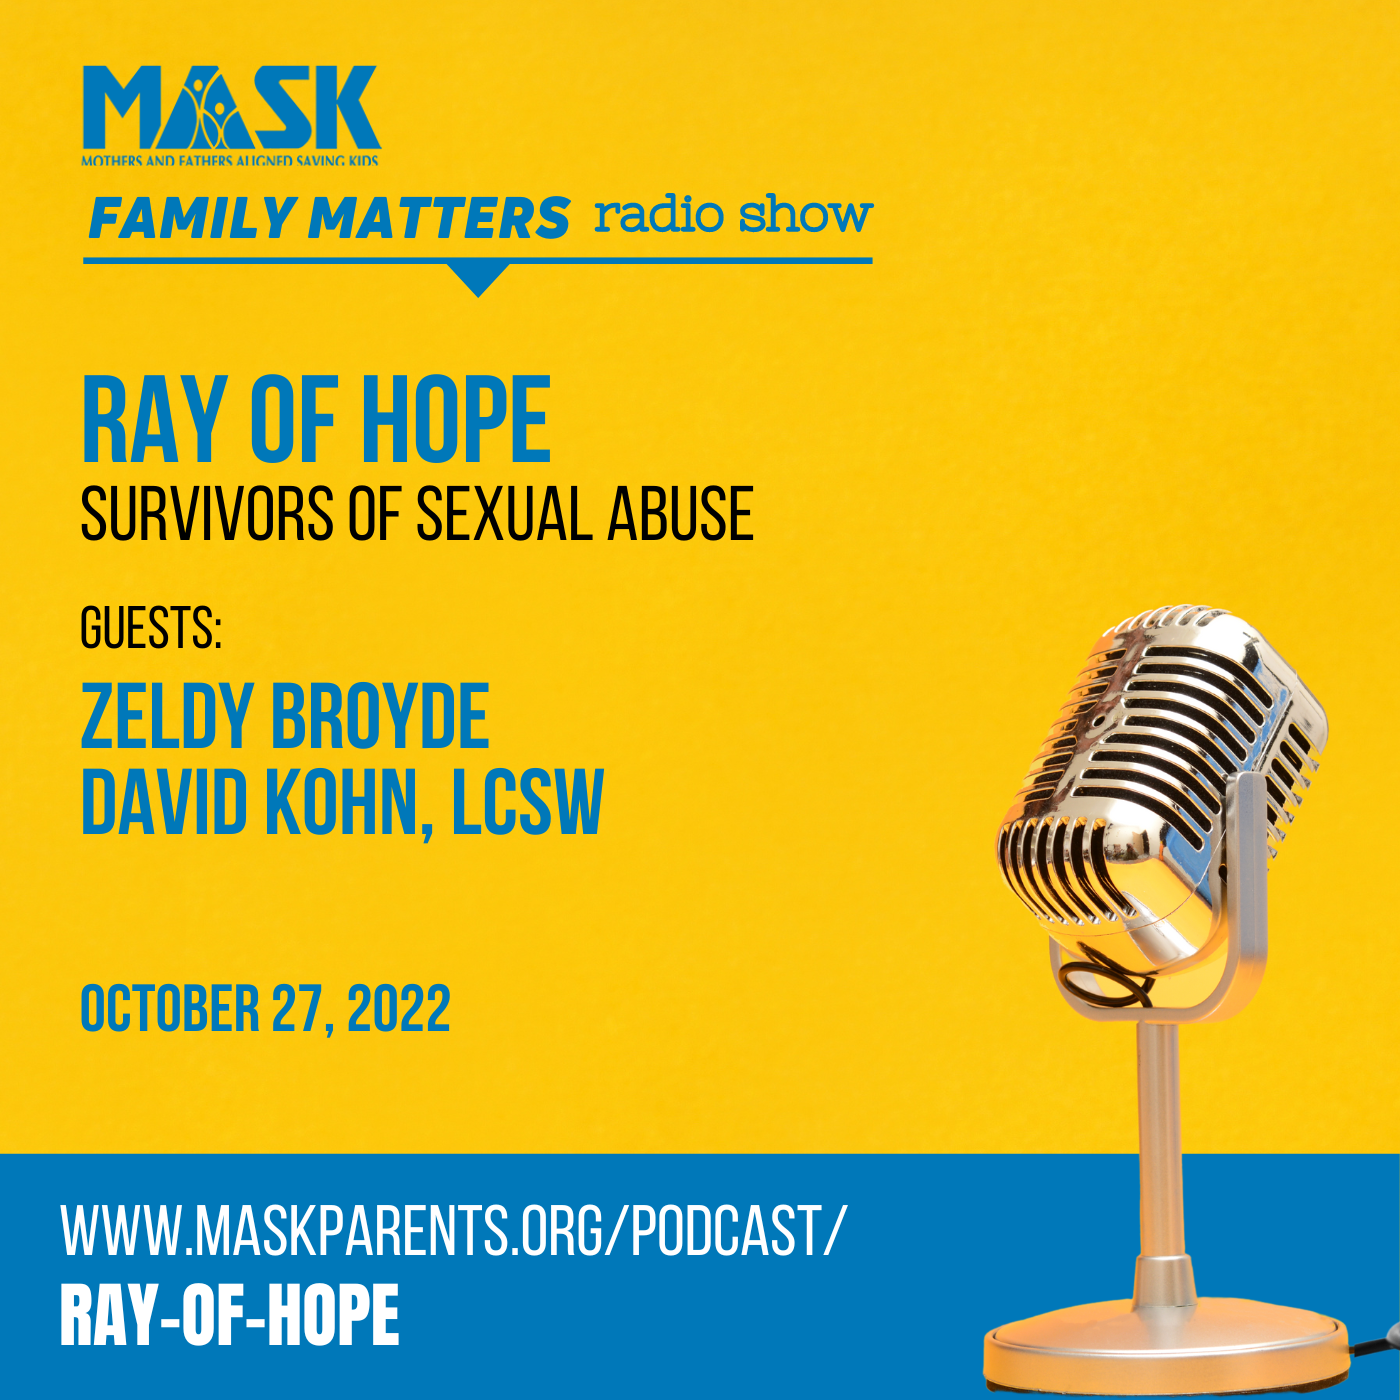 Ray of Hope: Survivors of Sexual abuse